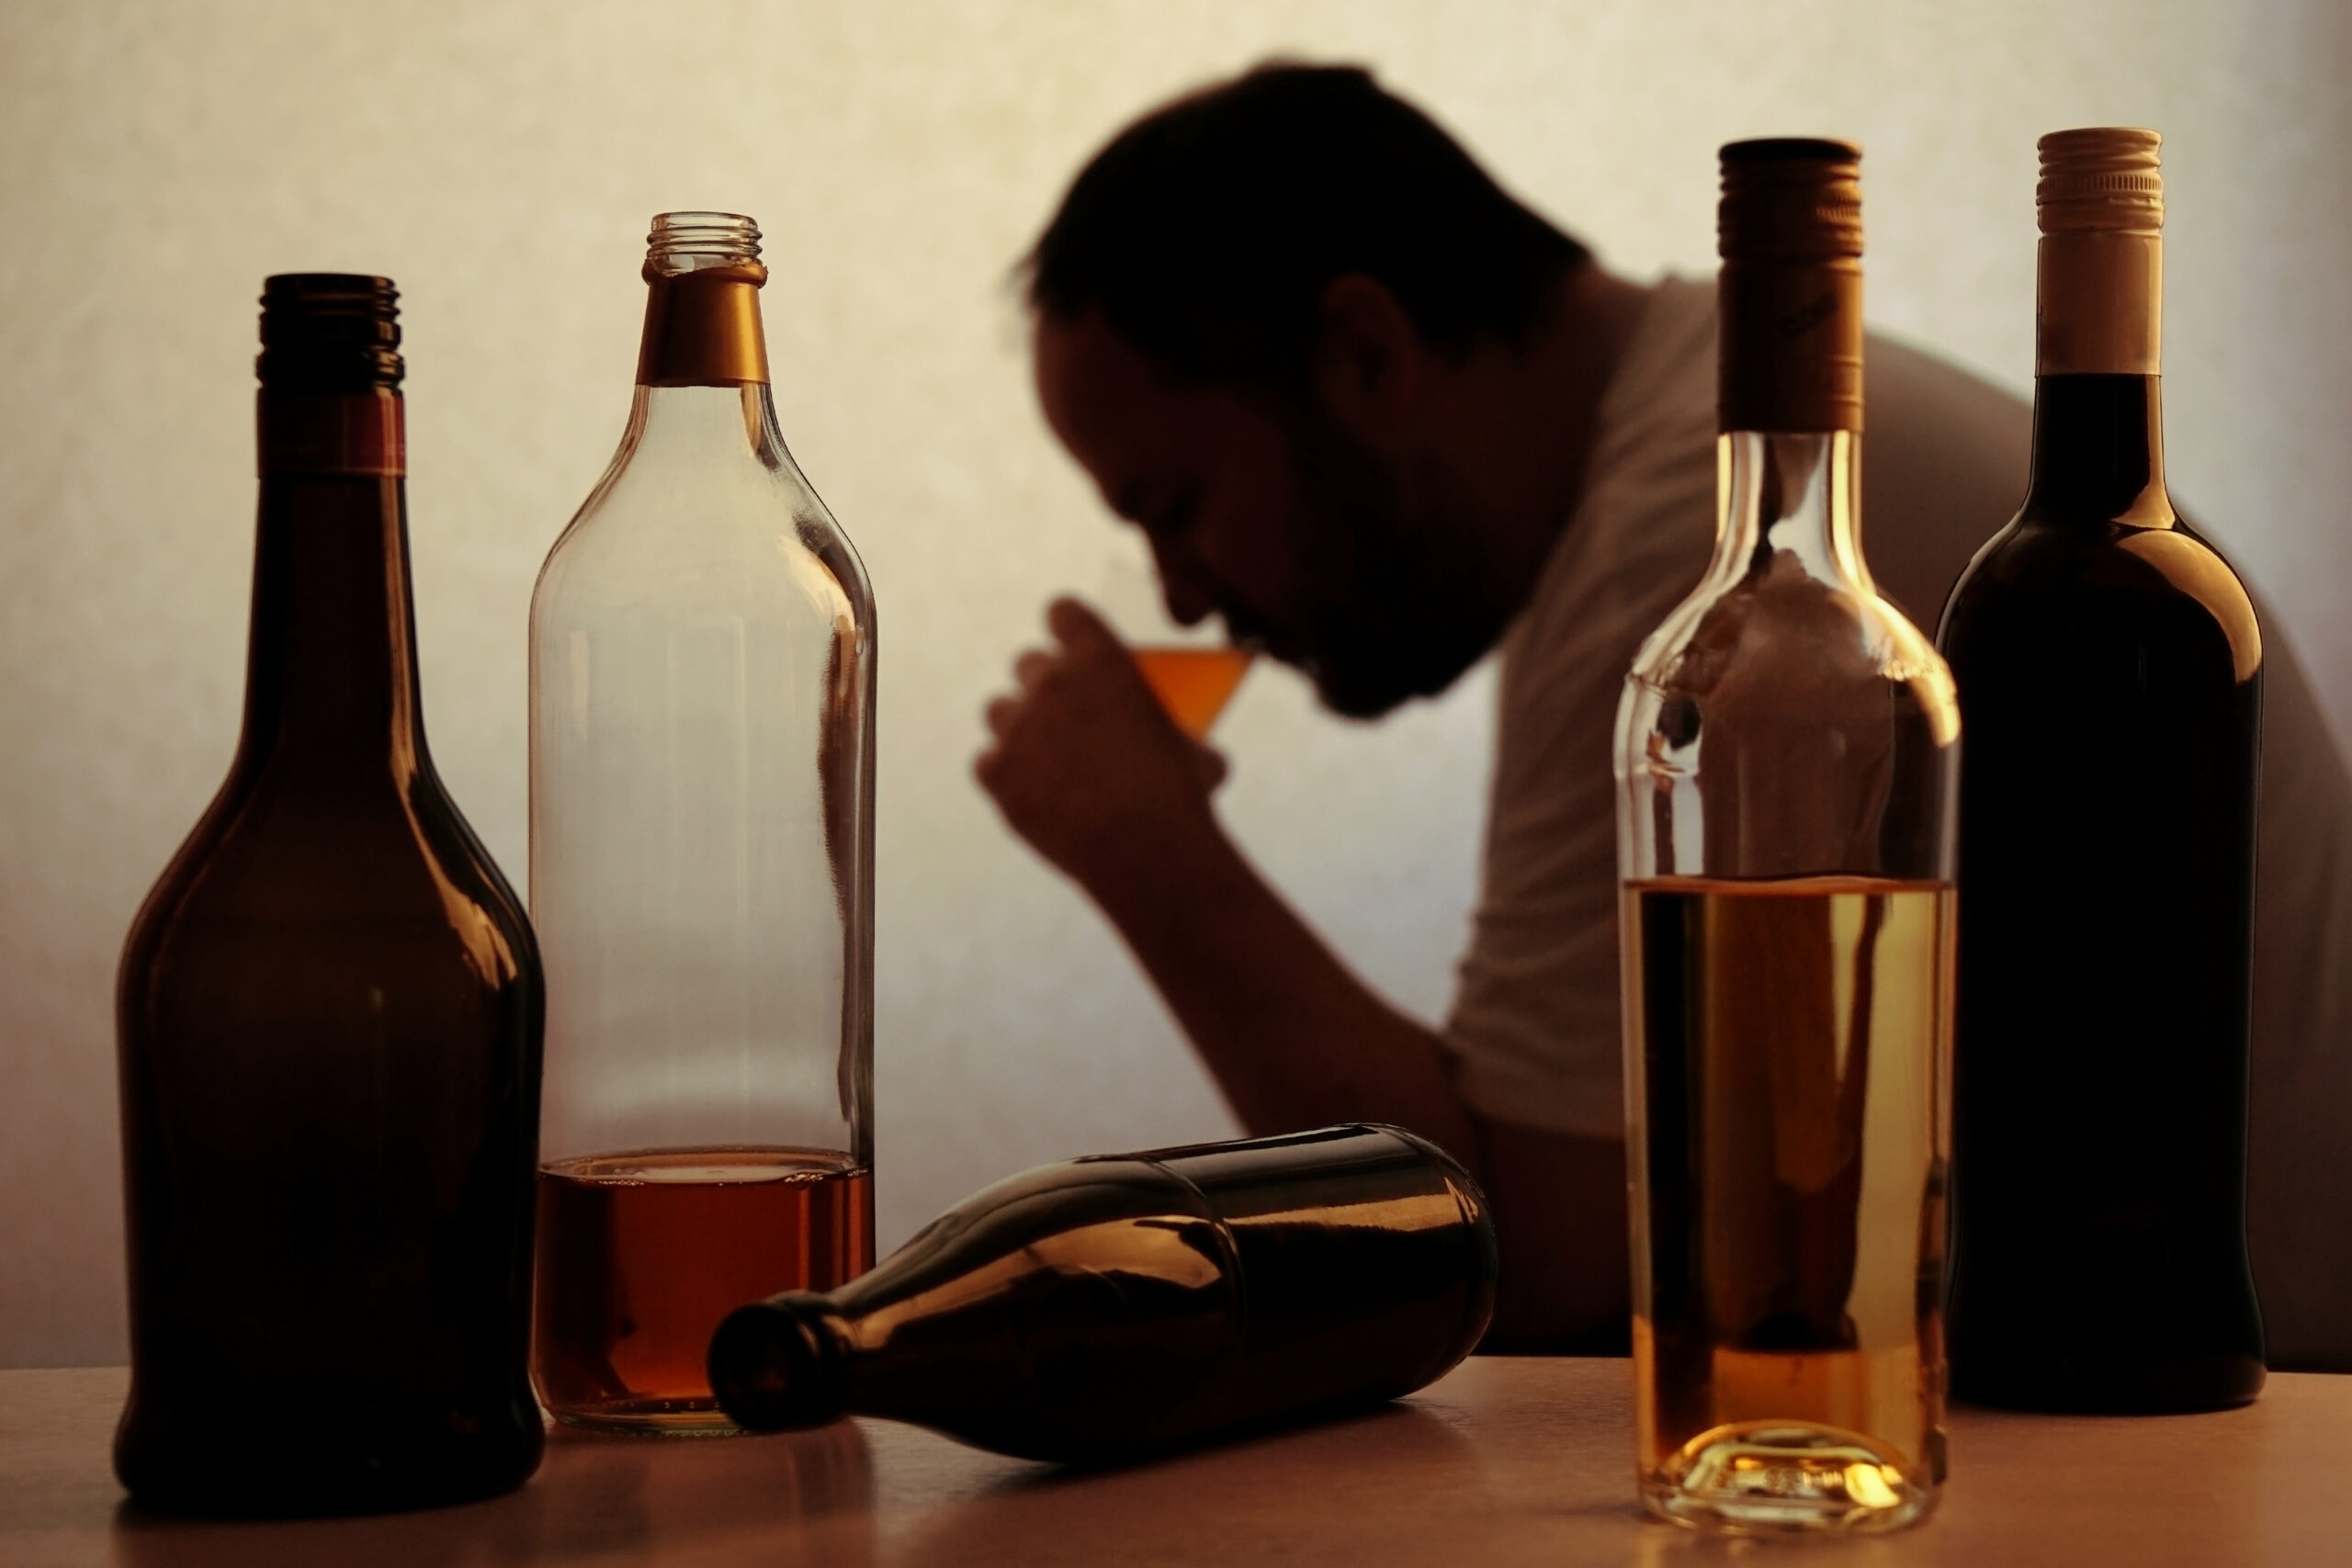 Can alcoholics drink in moderation?